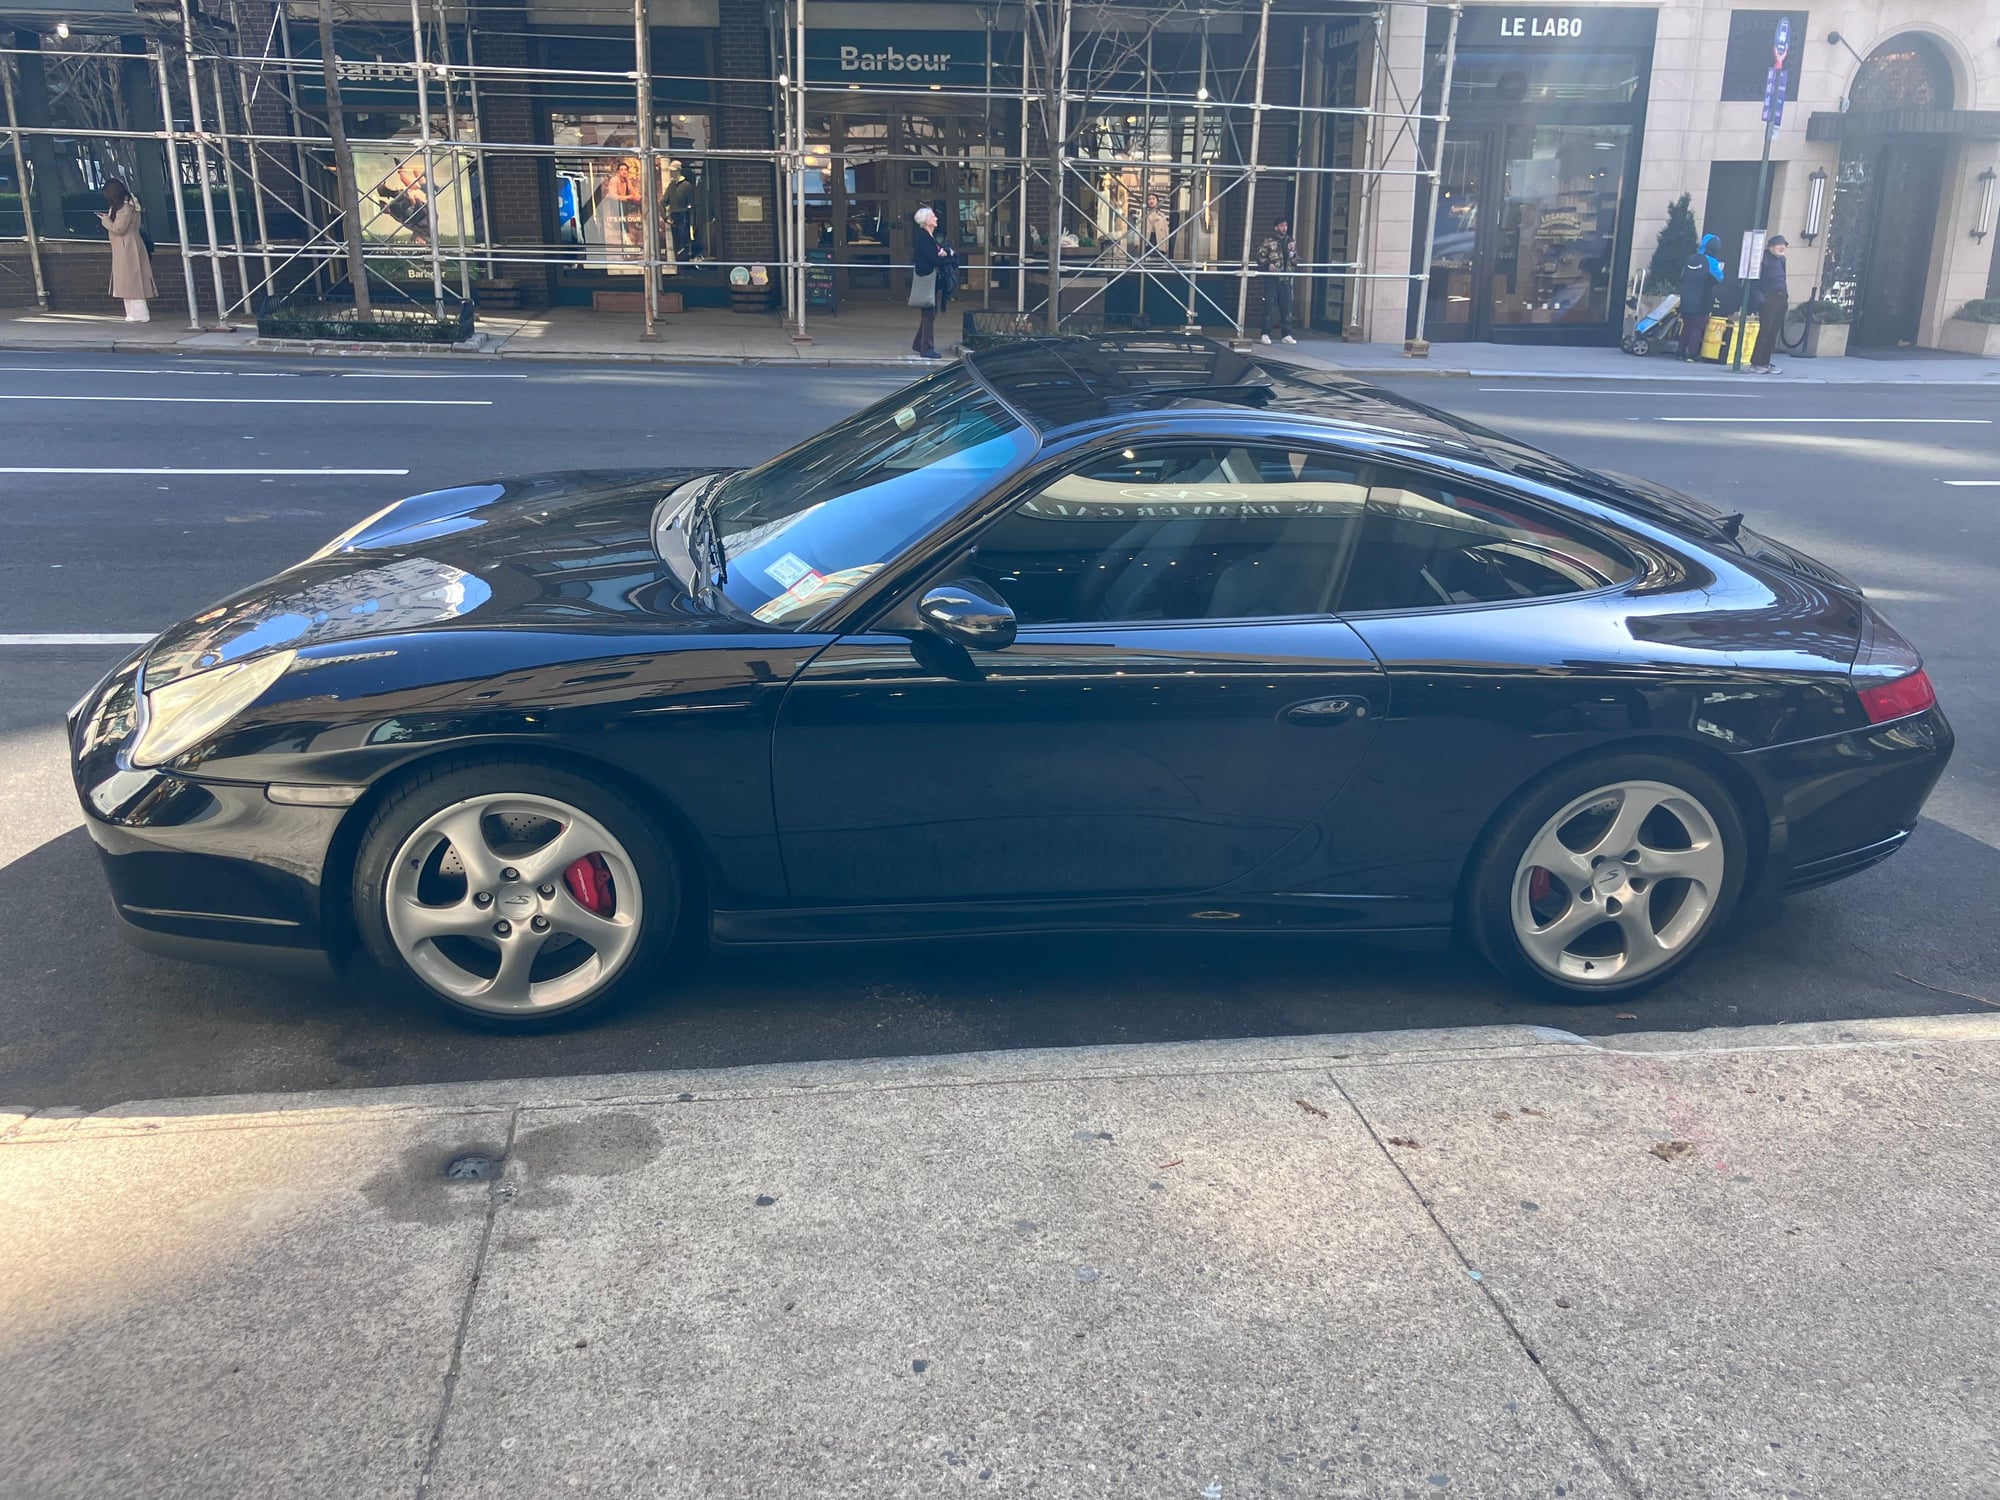 2002 Porsche 911 - 2002 C4S - one owner - Used - VIN WPOAA299825623436 - 199,600 Miles - Manual - Coupe - Black - New York City, NY 10024, United States